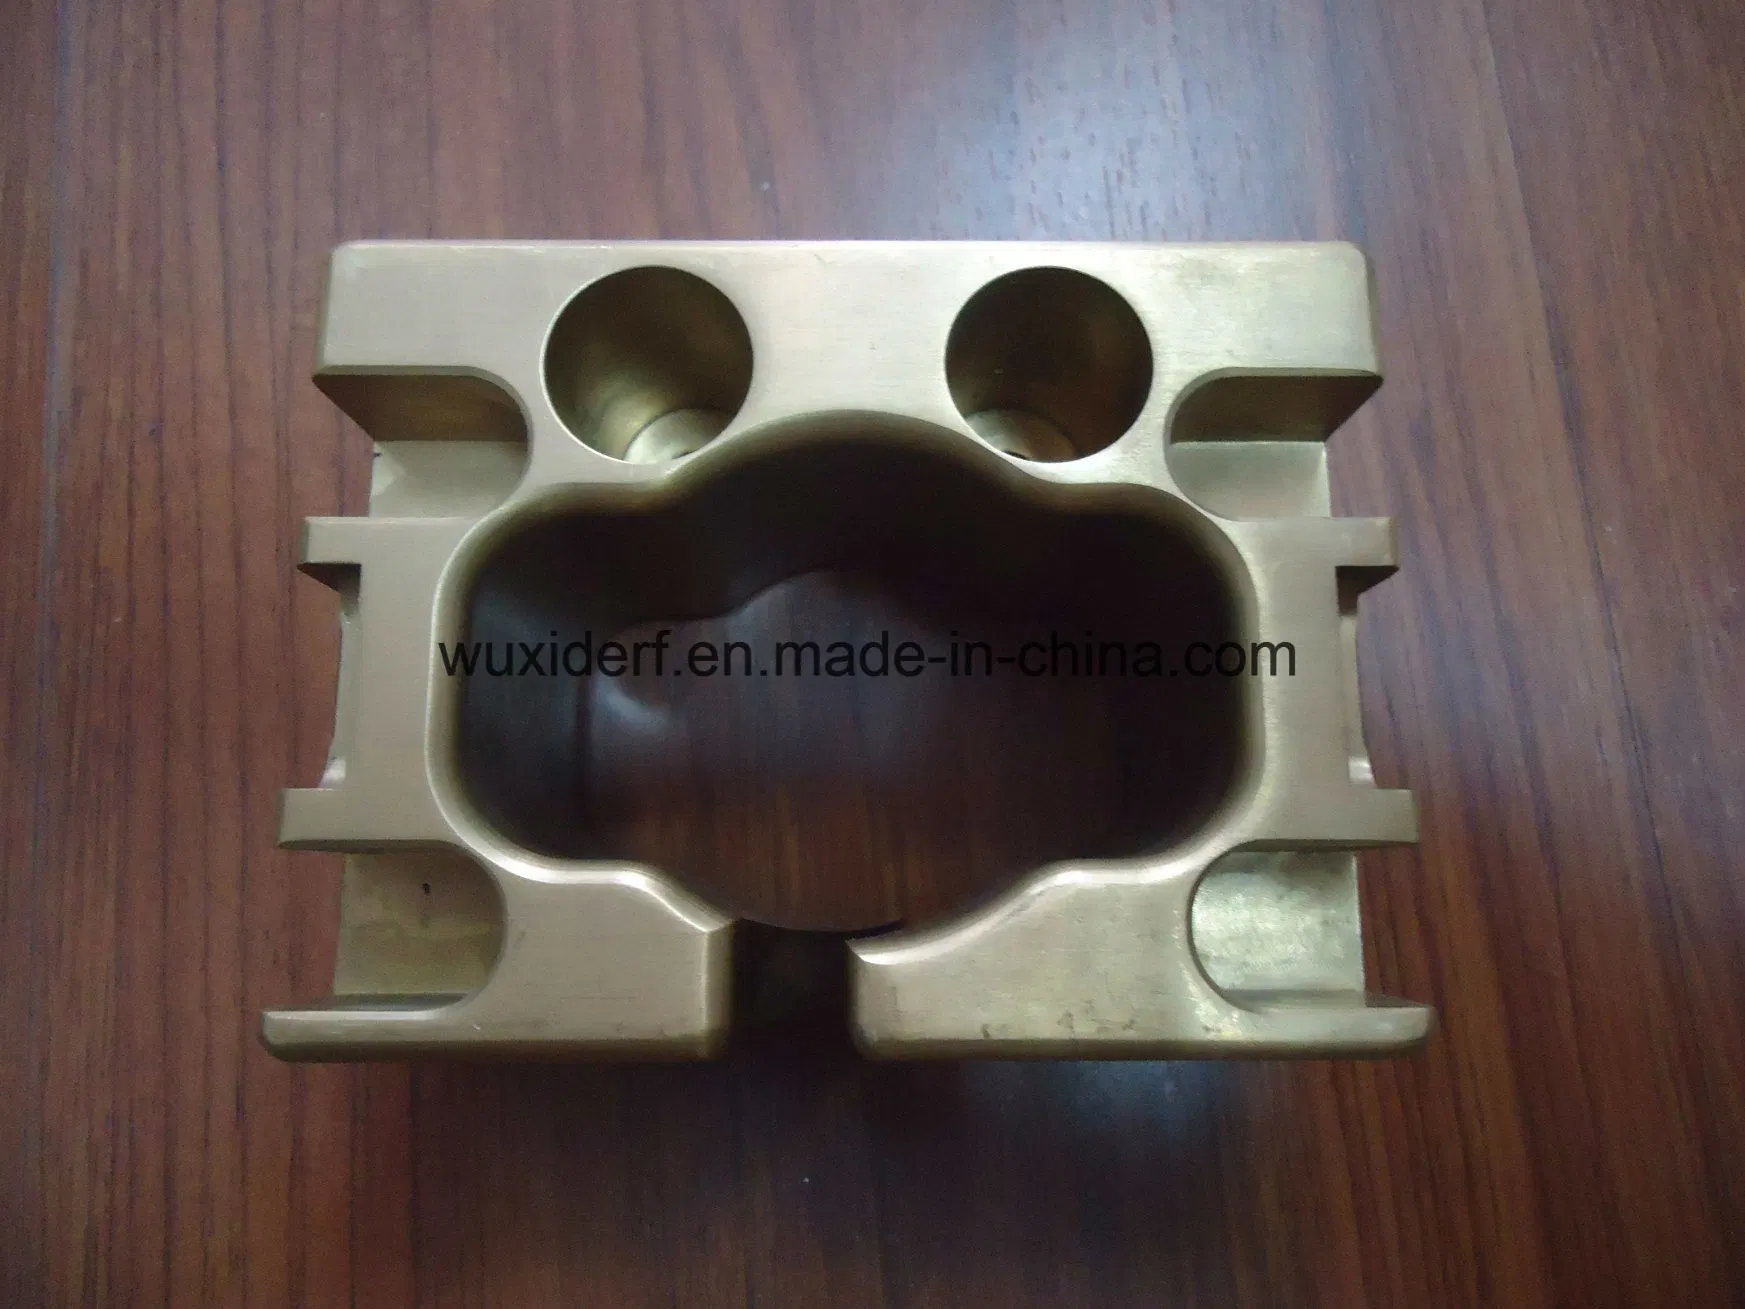 Brass Die Casting Part with CNC Machining Machinery Parts